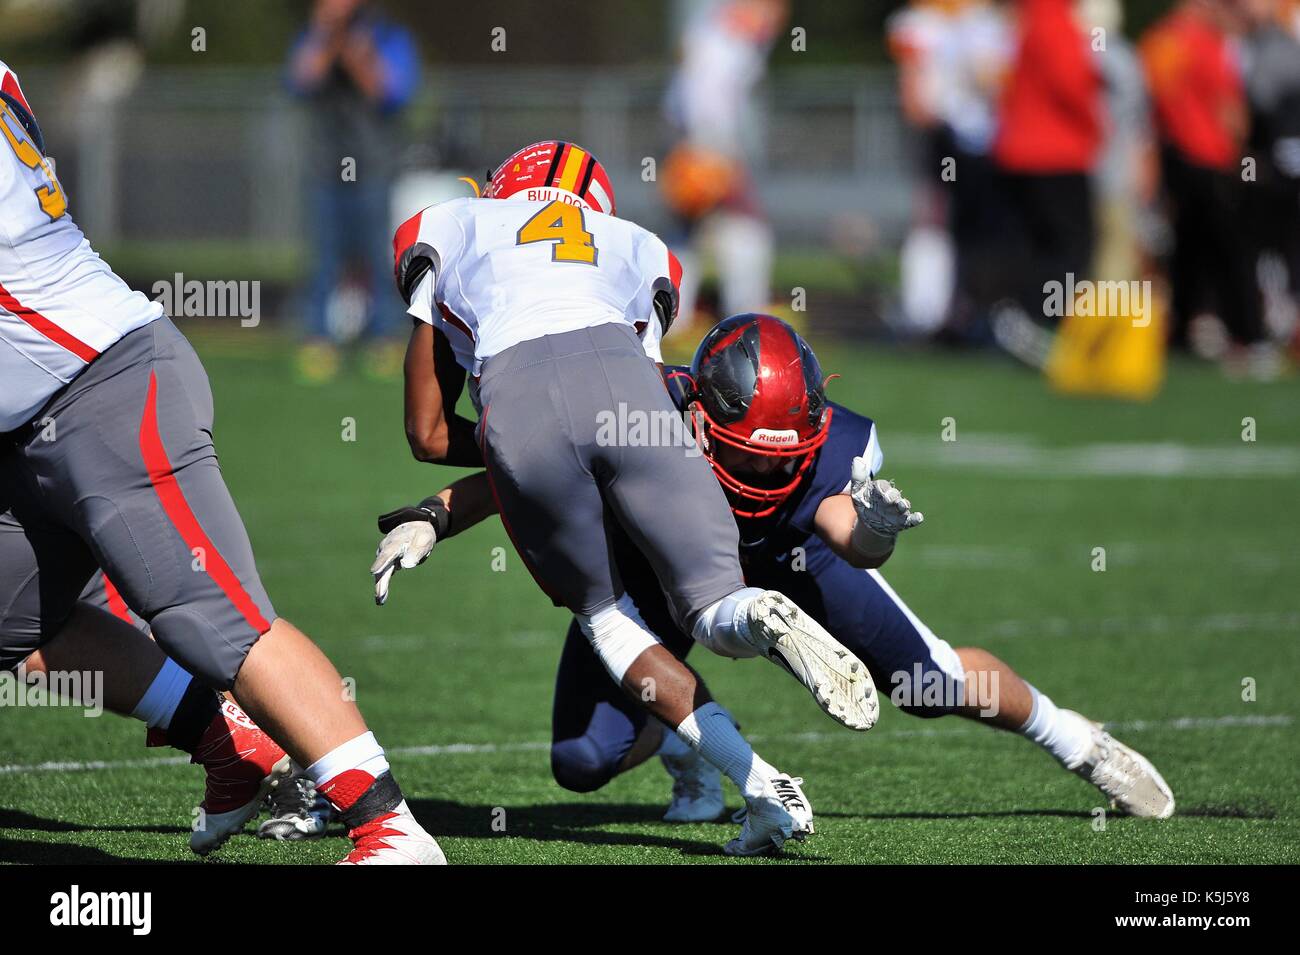 Player well positioned to make a tackle during a high school football game. USA. Stock Photo